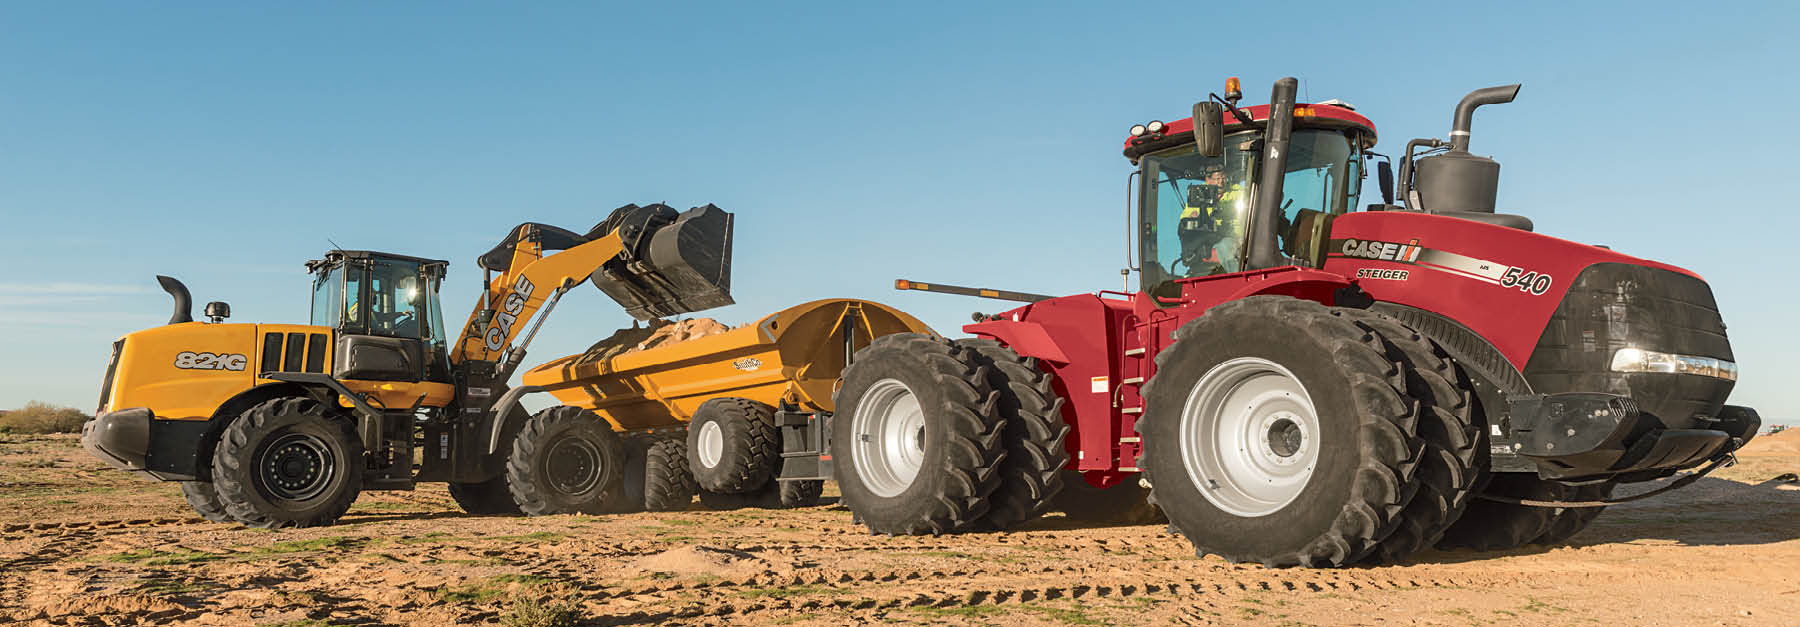 Case wheel loader and Case IH tractor